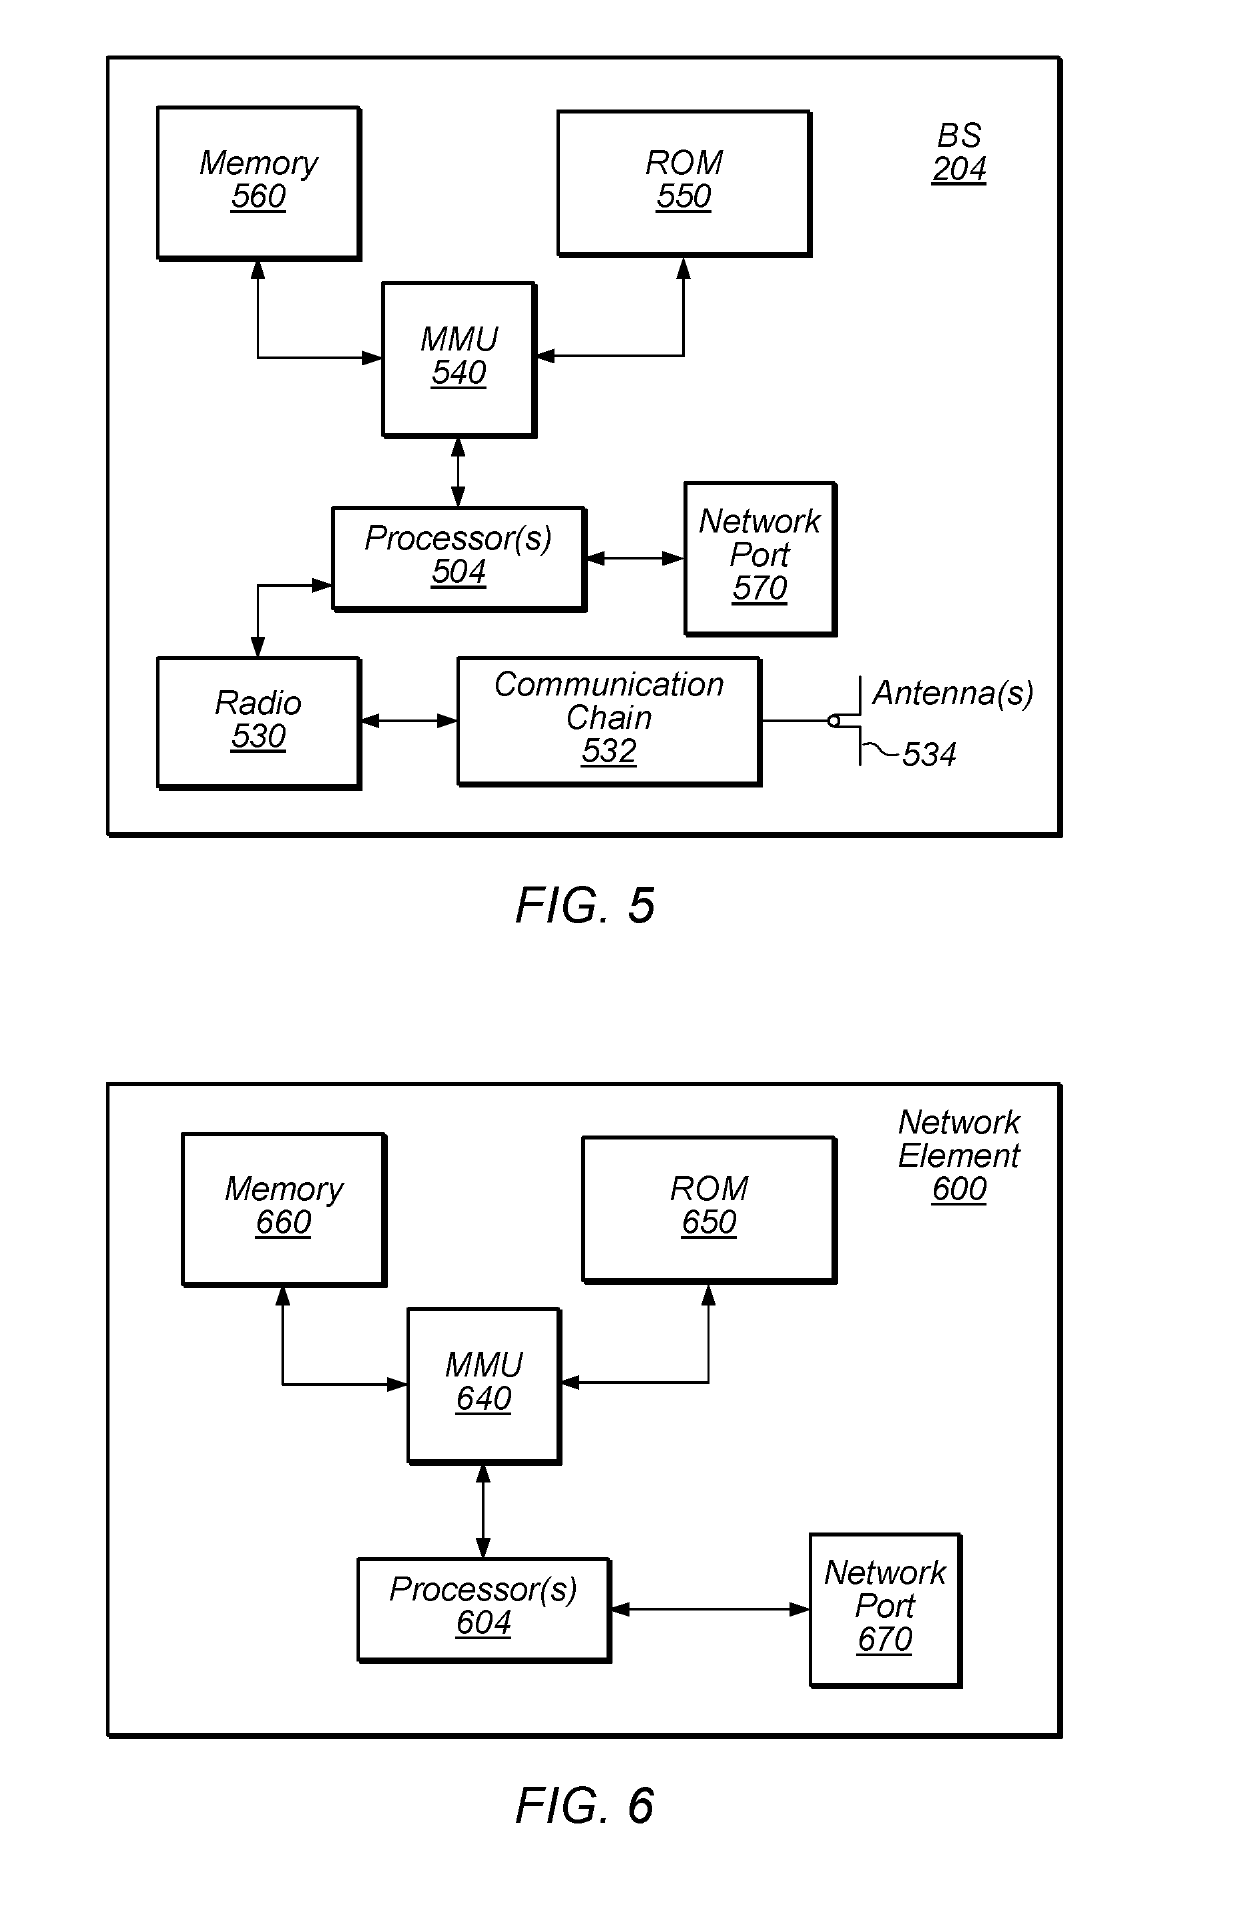 Multipath Transmission Control Protocol Proxy Use in a Cellular Network